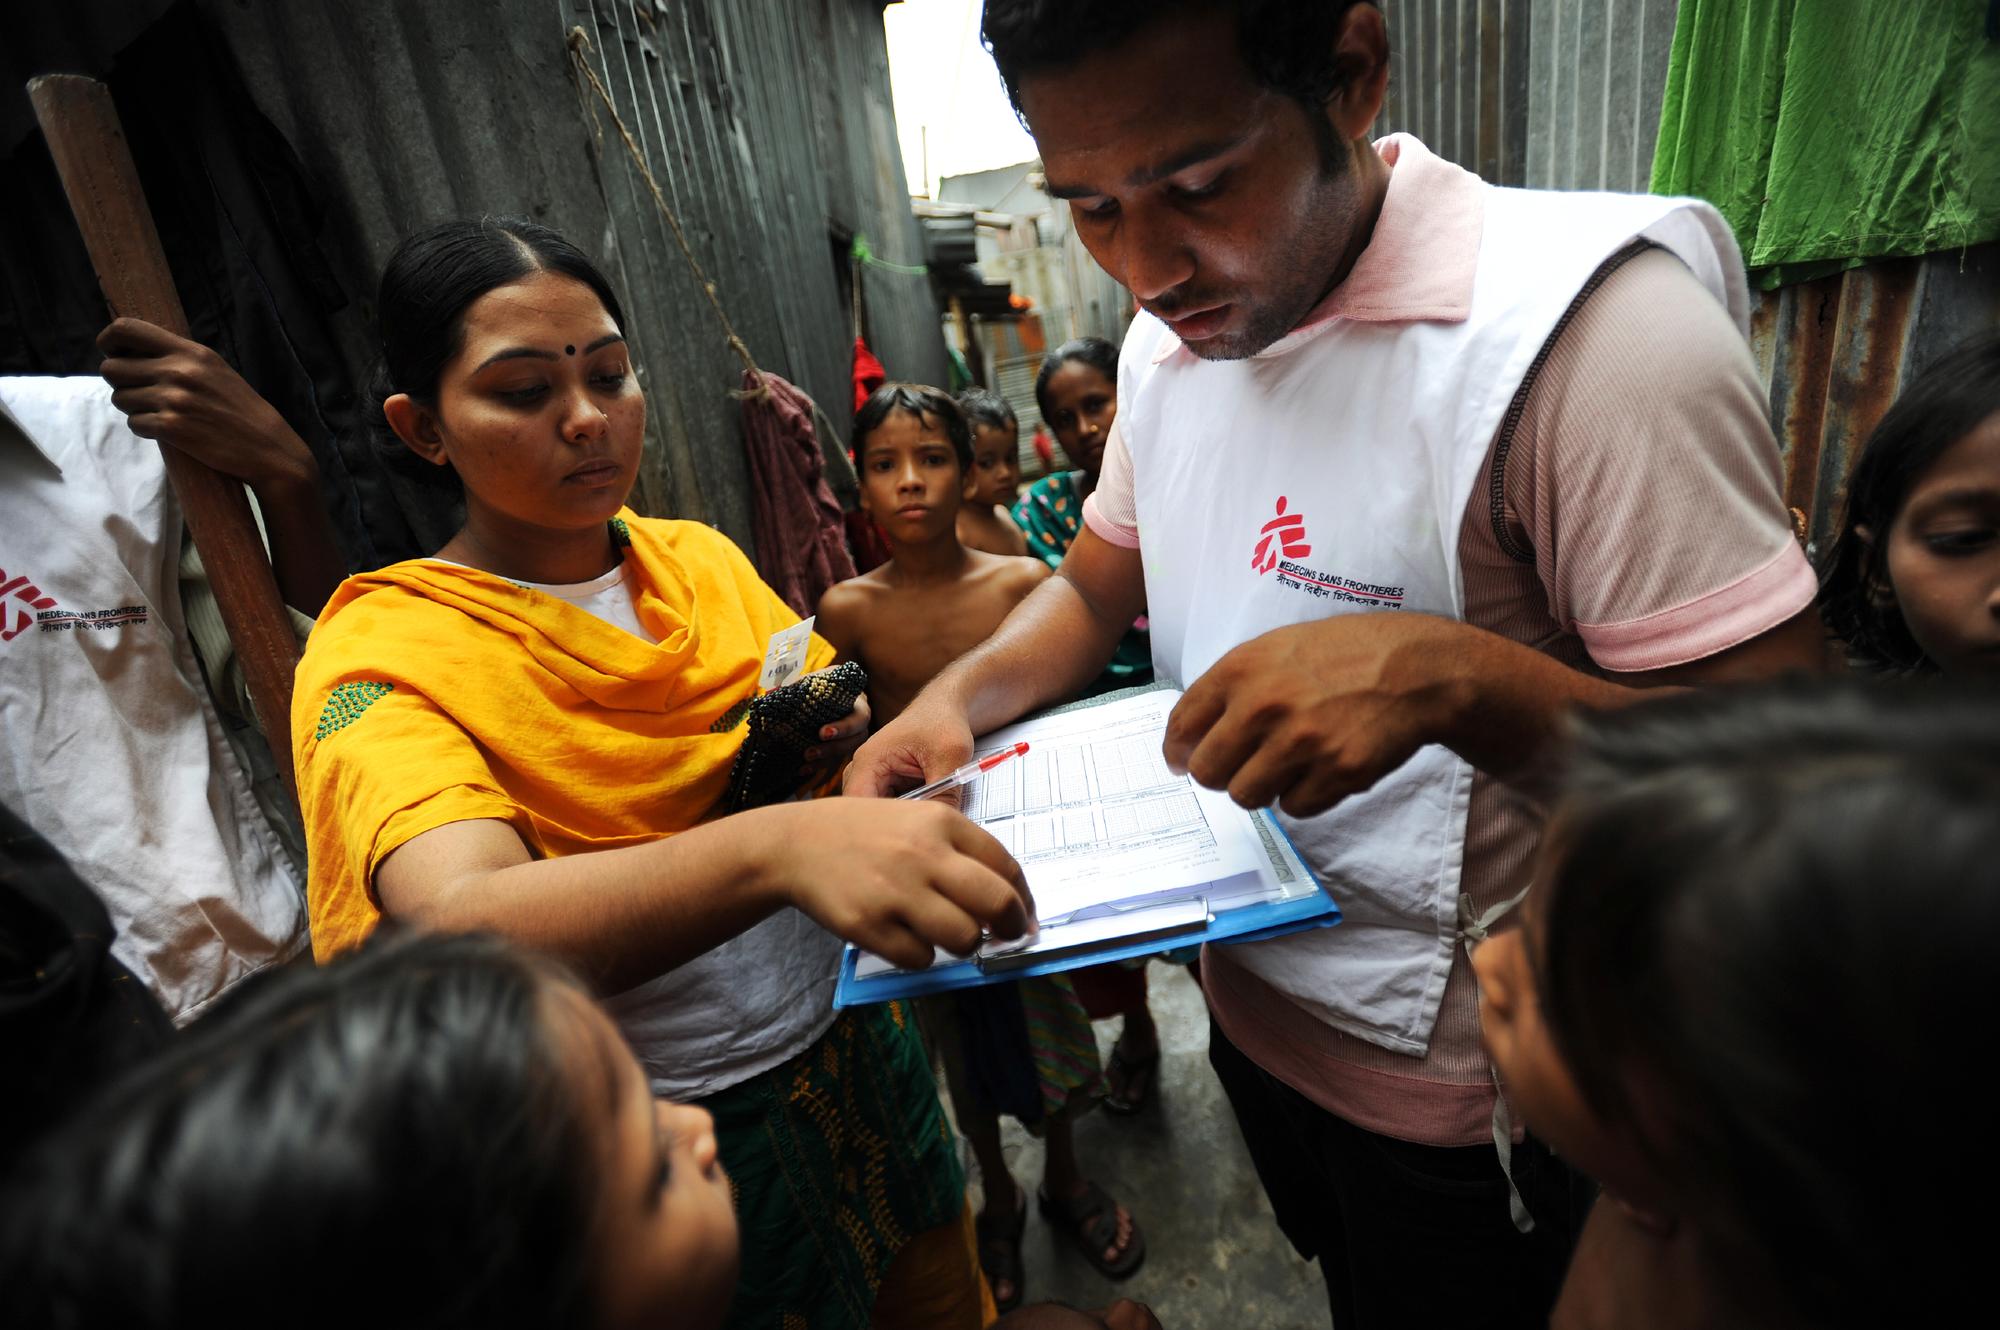 An MSF worker surrounded by people looks at a clip board.